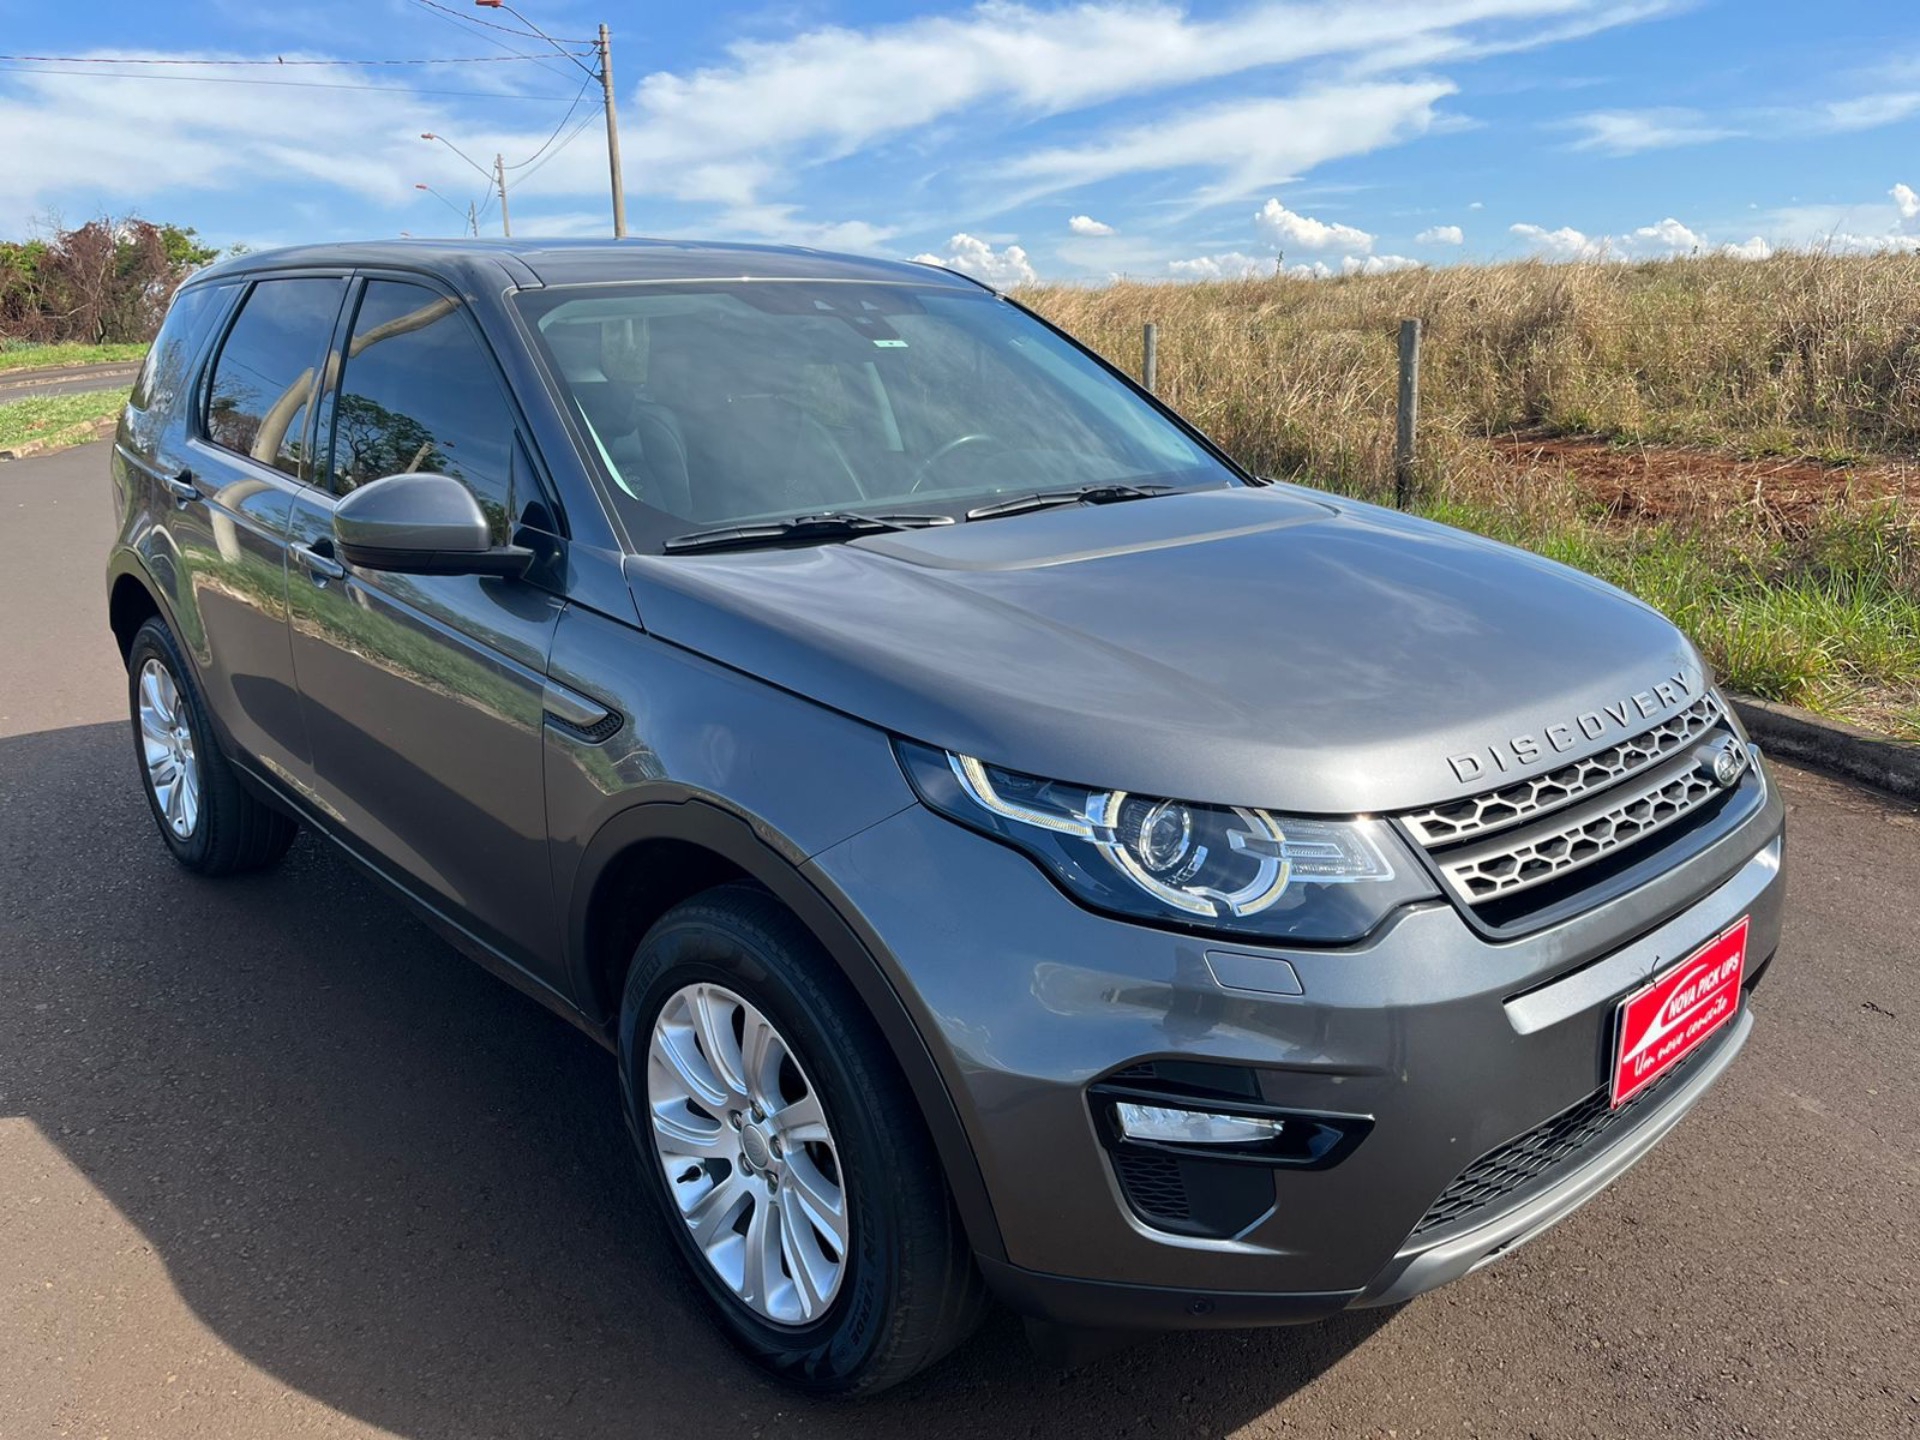 Land Rover Discovery SE 3.0 V6 4x4 TD6 Diesel Aut.